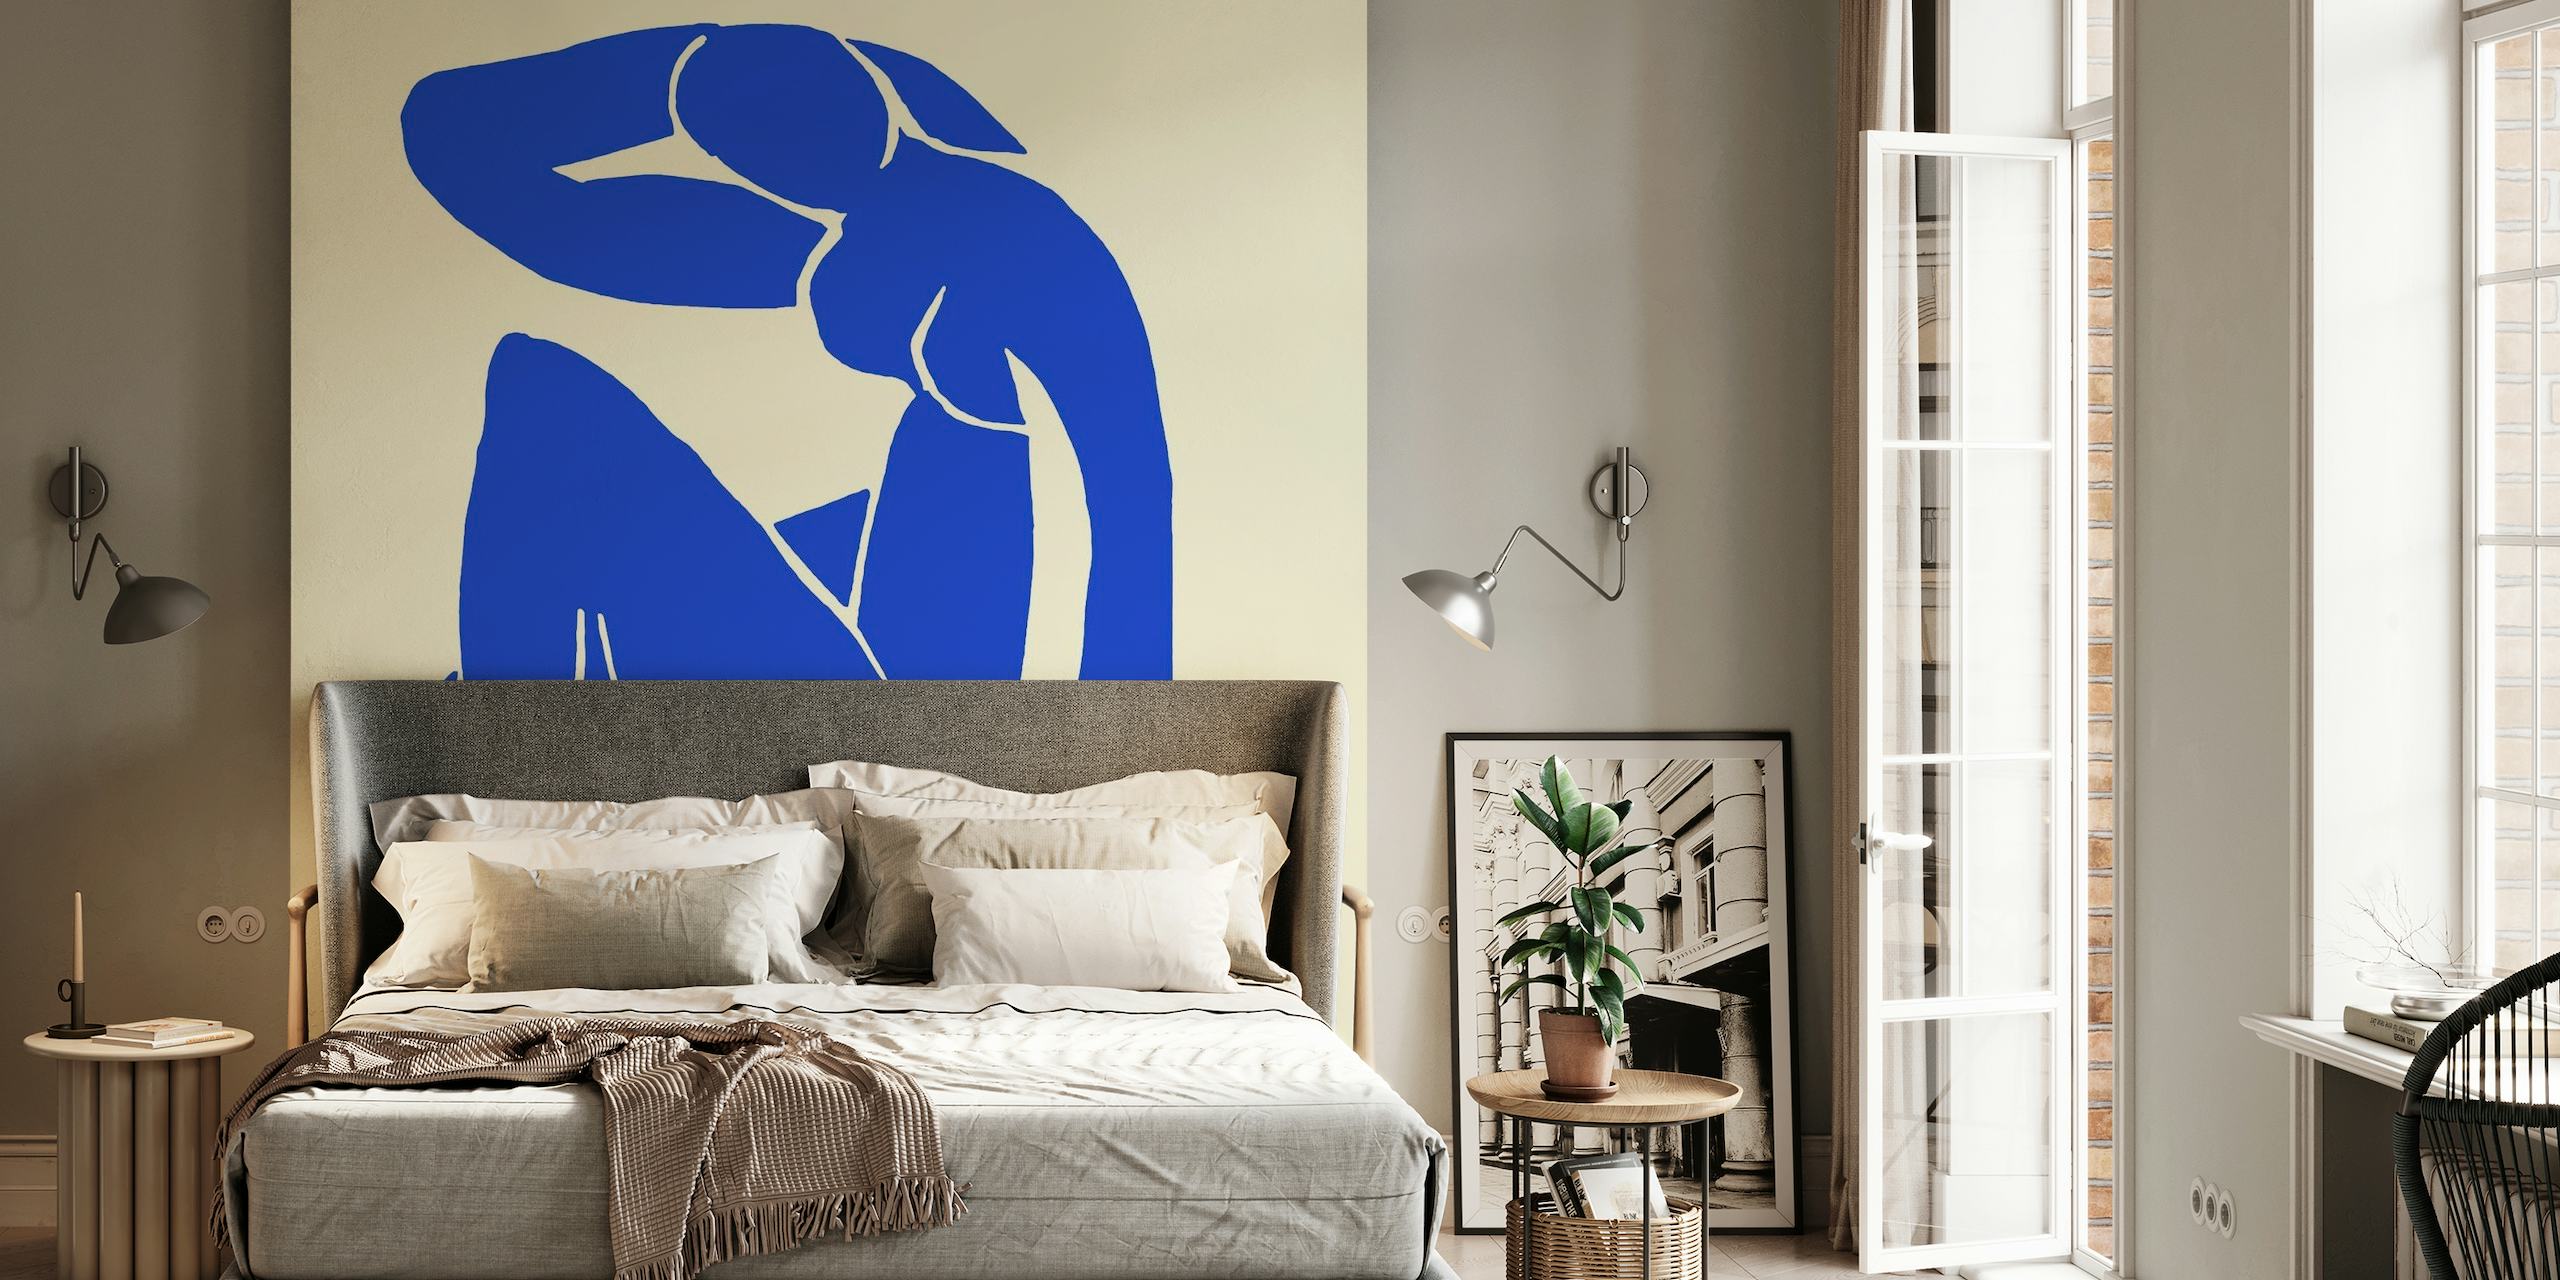 Abstract blue figure mural inspired by Matisse's art style